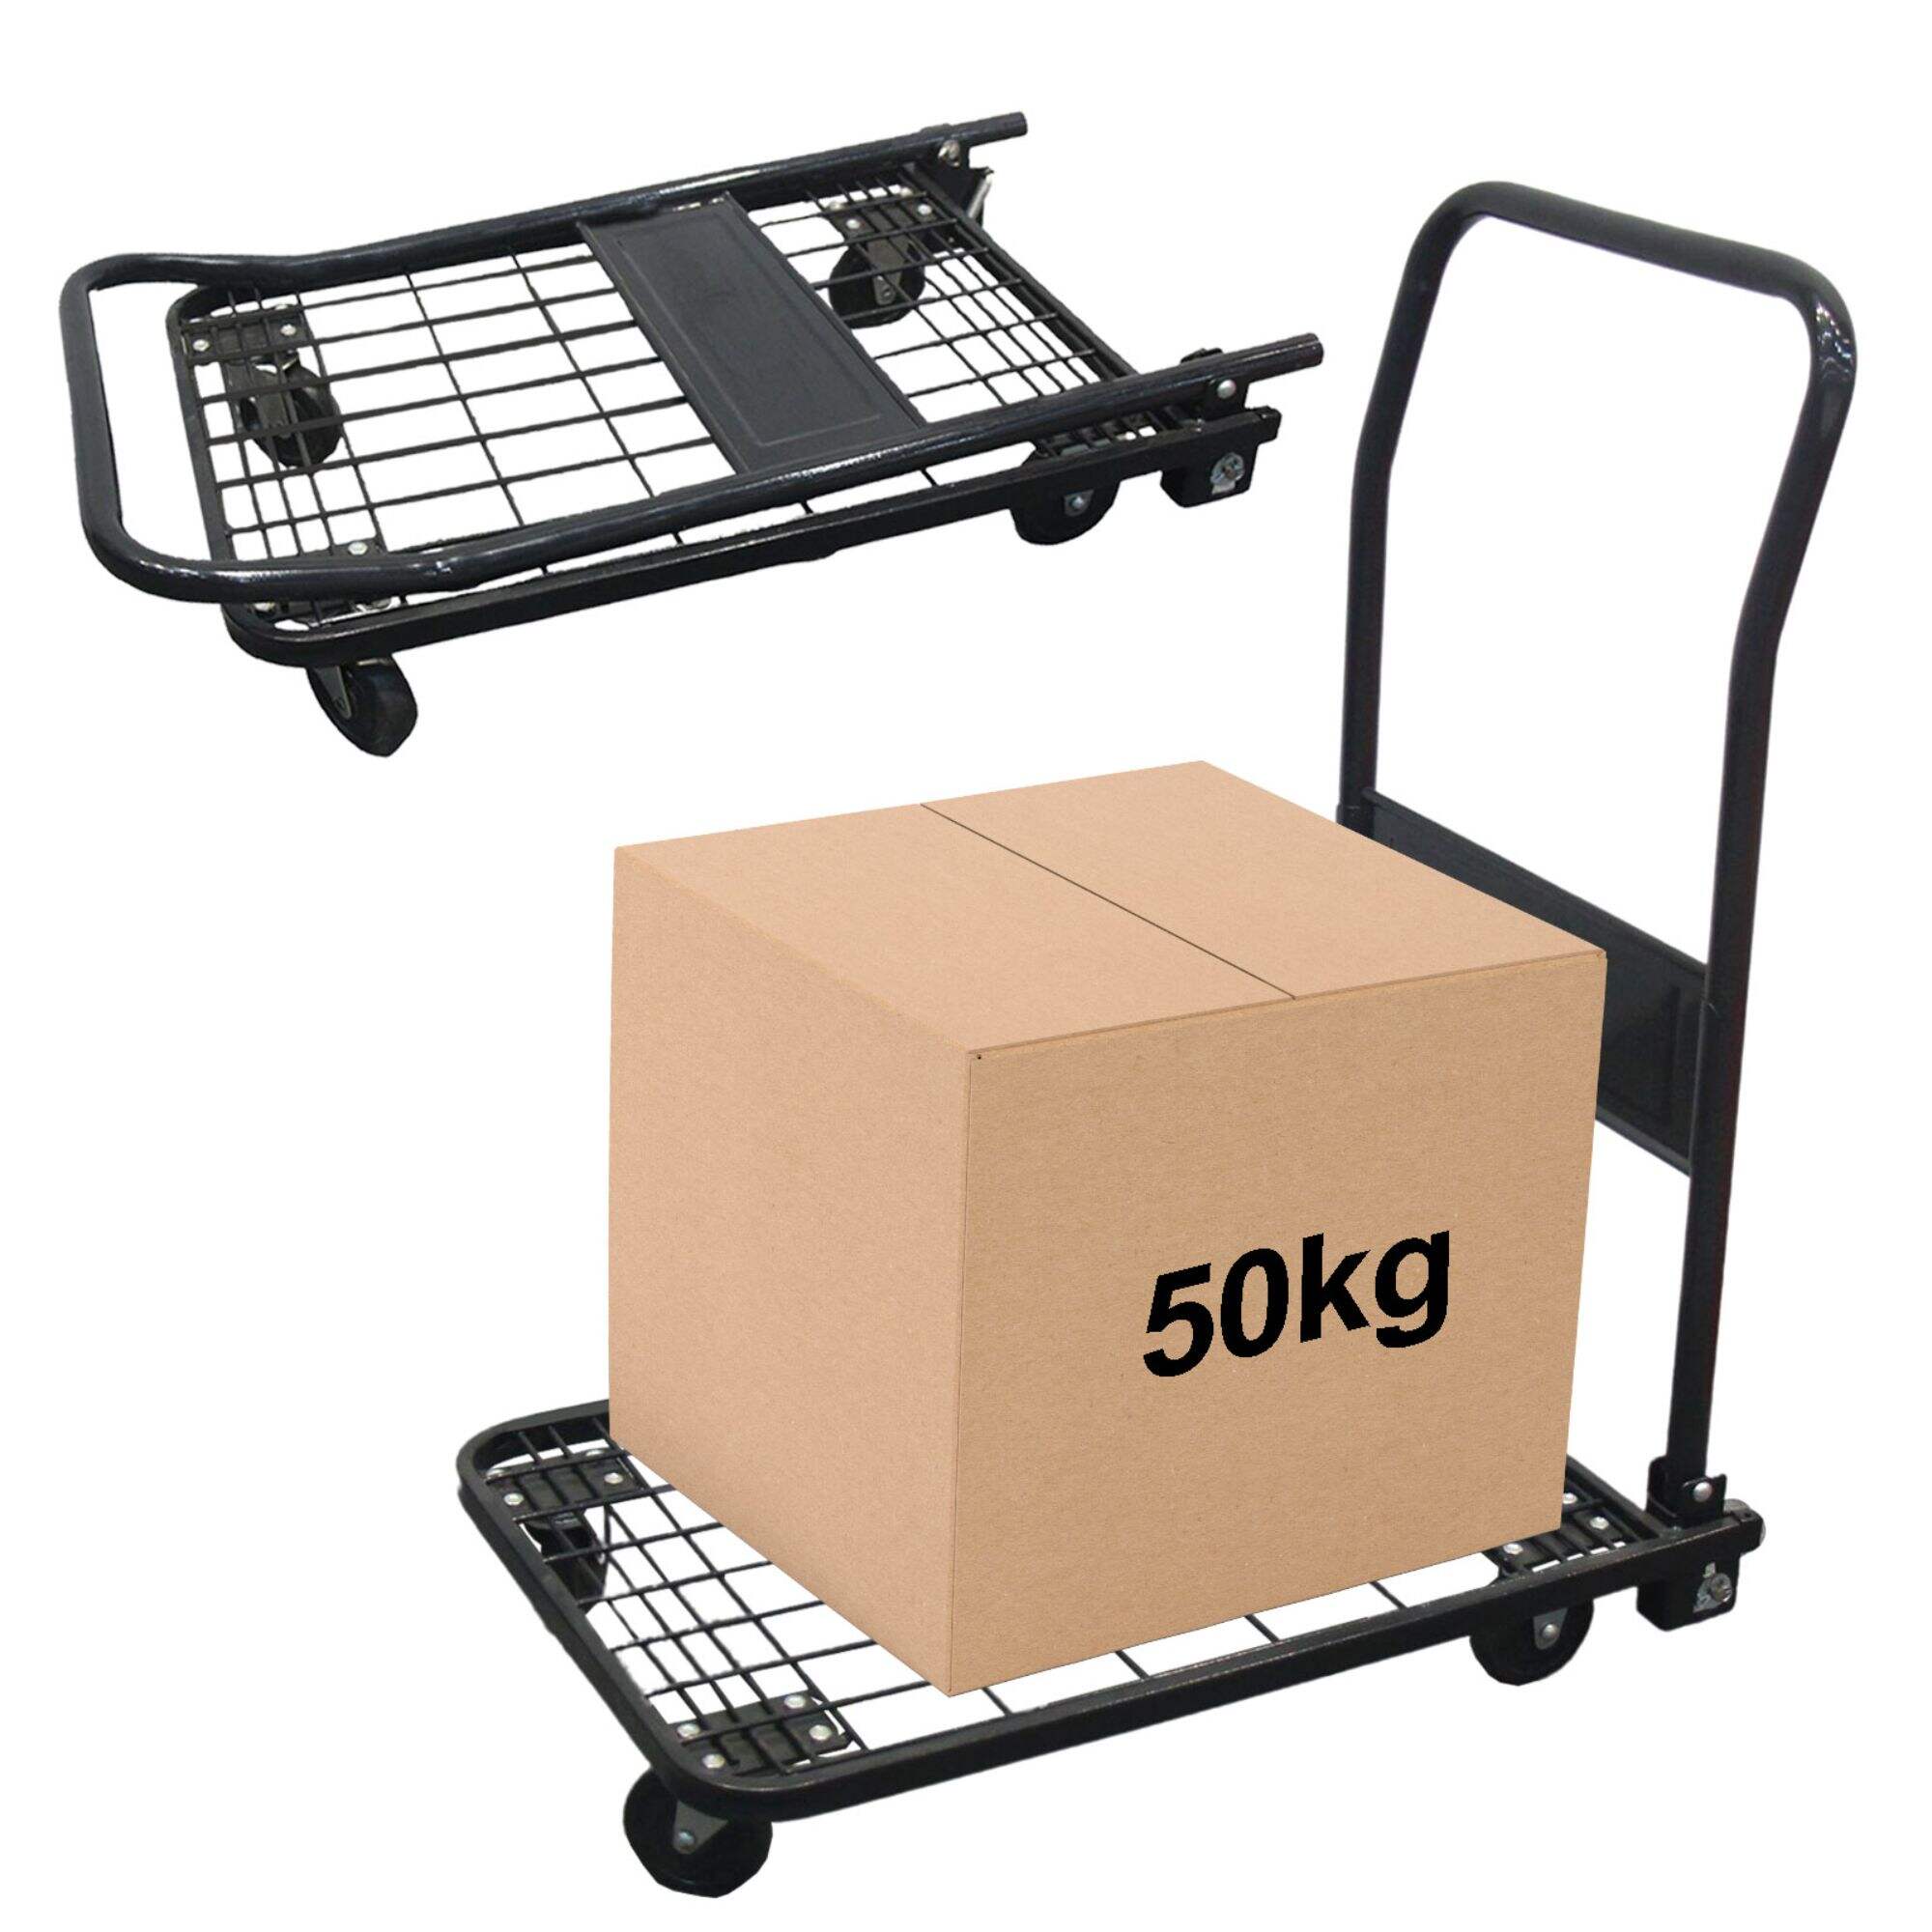 PH50 Platform Hand Trolley Cart, Folding Flatbed Cart Dolly with 50kg Load, Lightweight Mesh